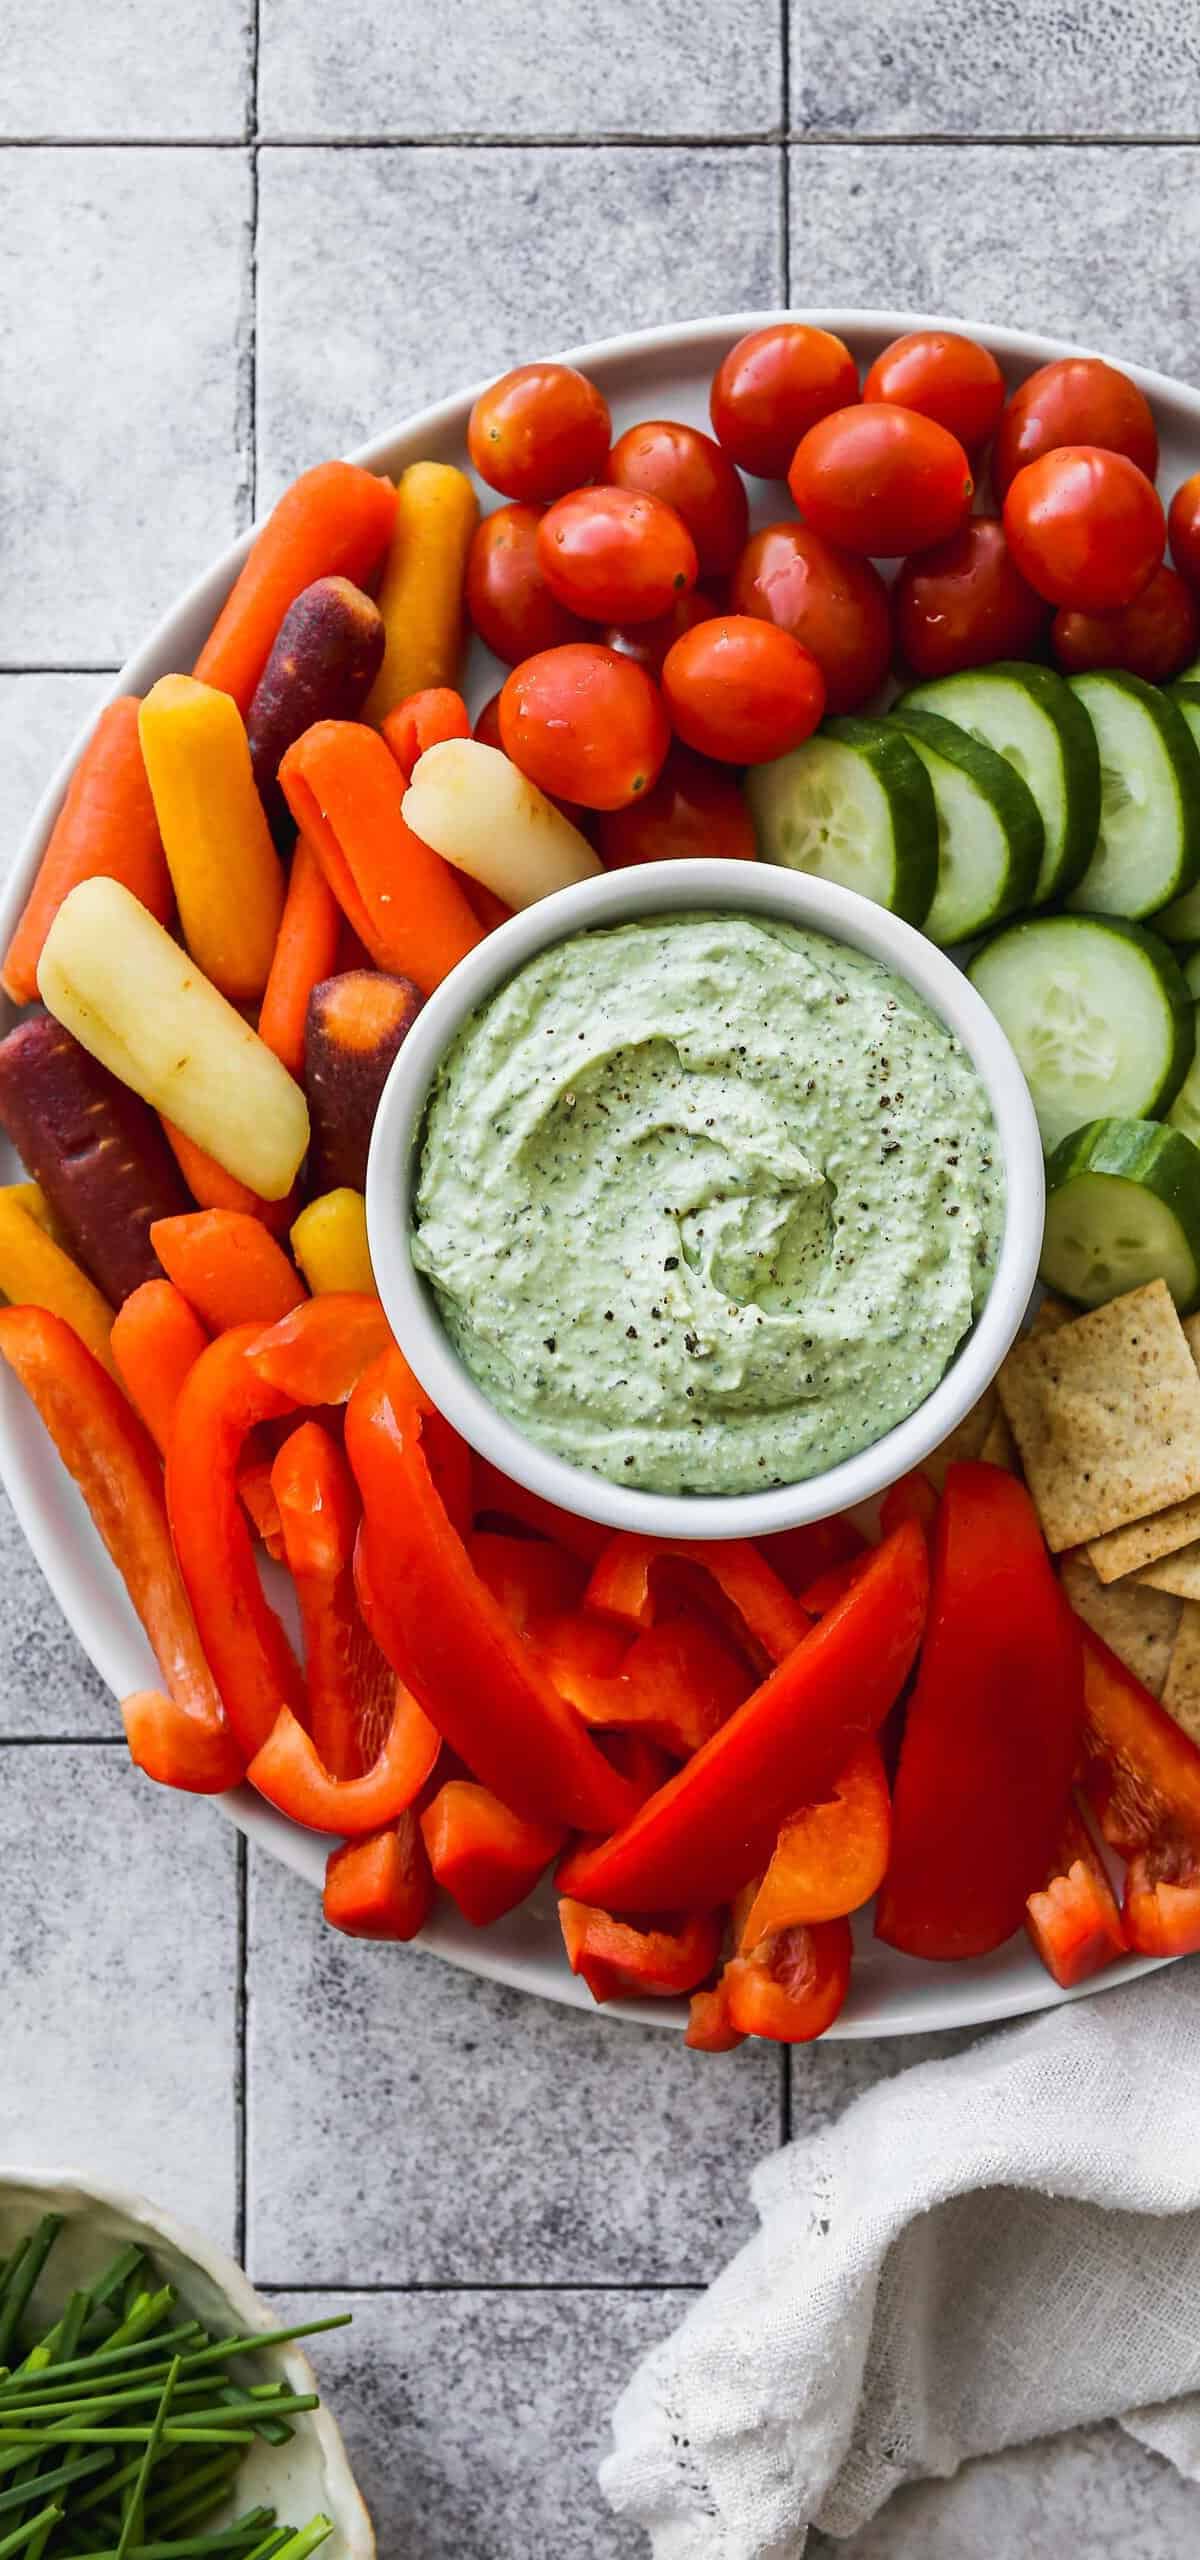  A healthy alternative to the usual party dips.